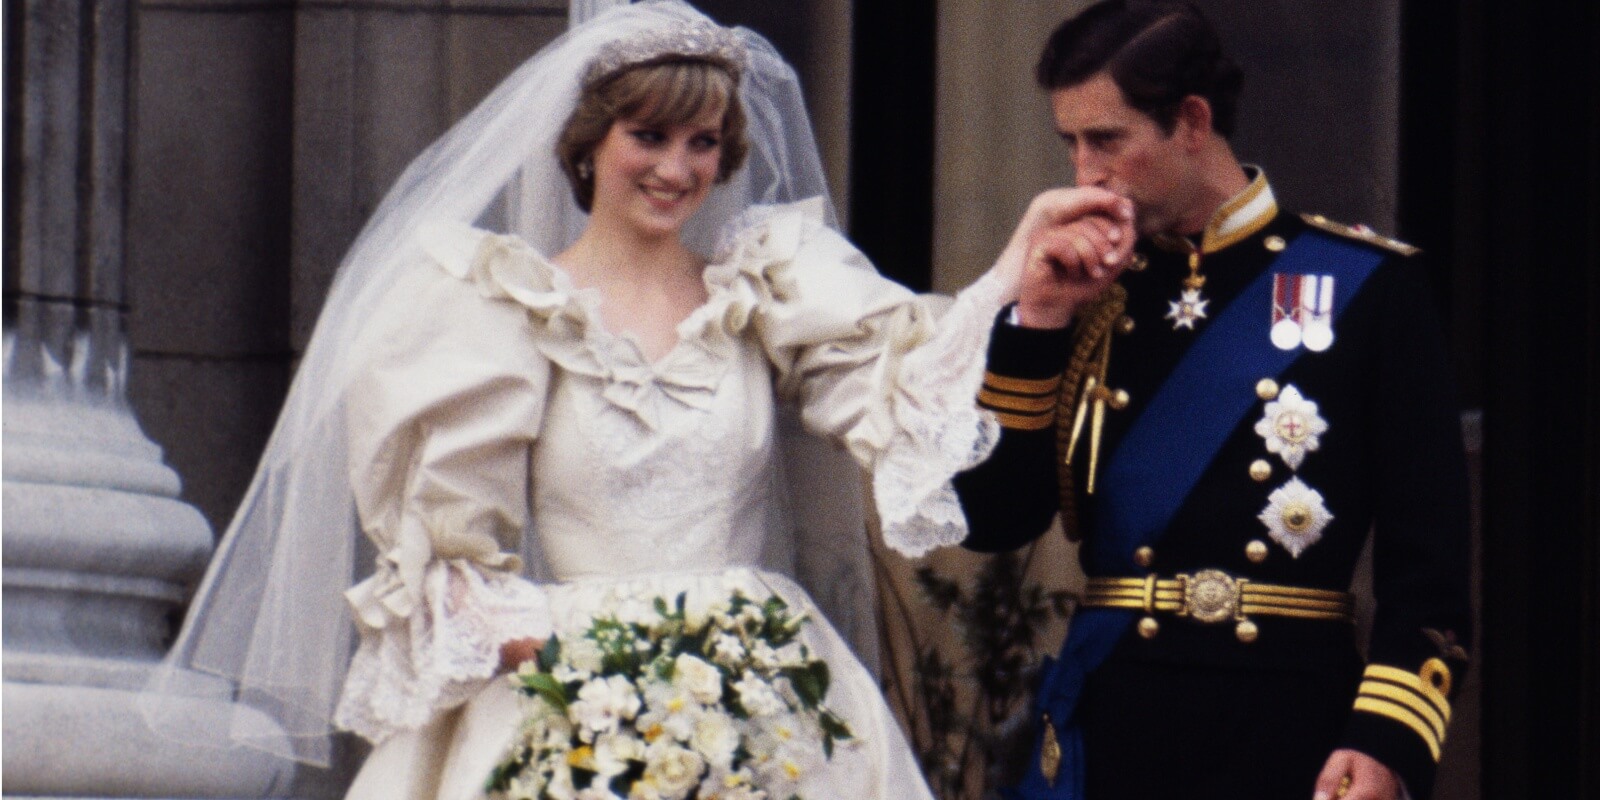 Princess Diana and Prince Charles at their 1981 wedding ceremony.